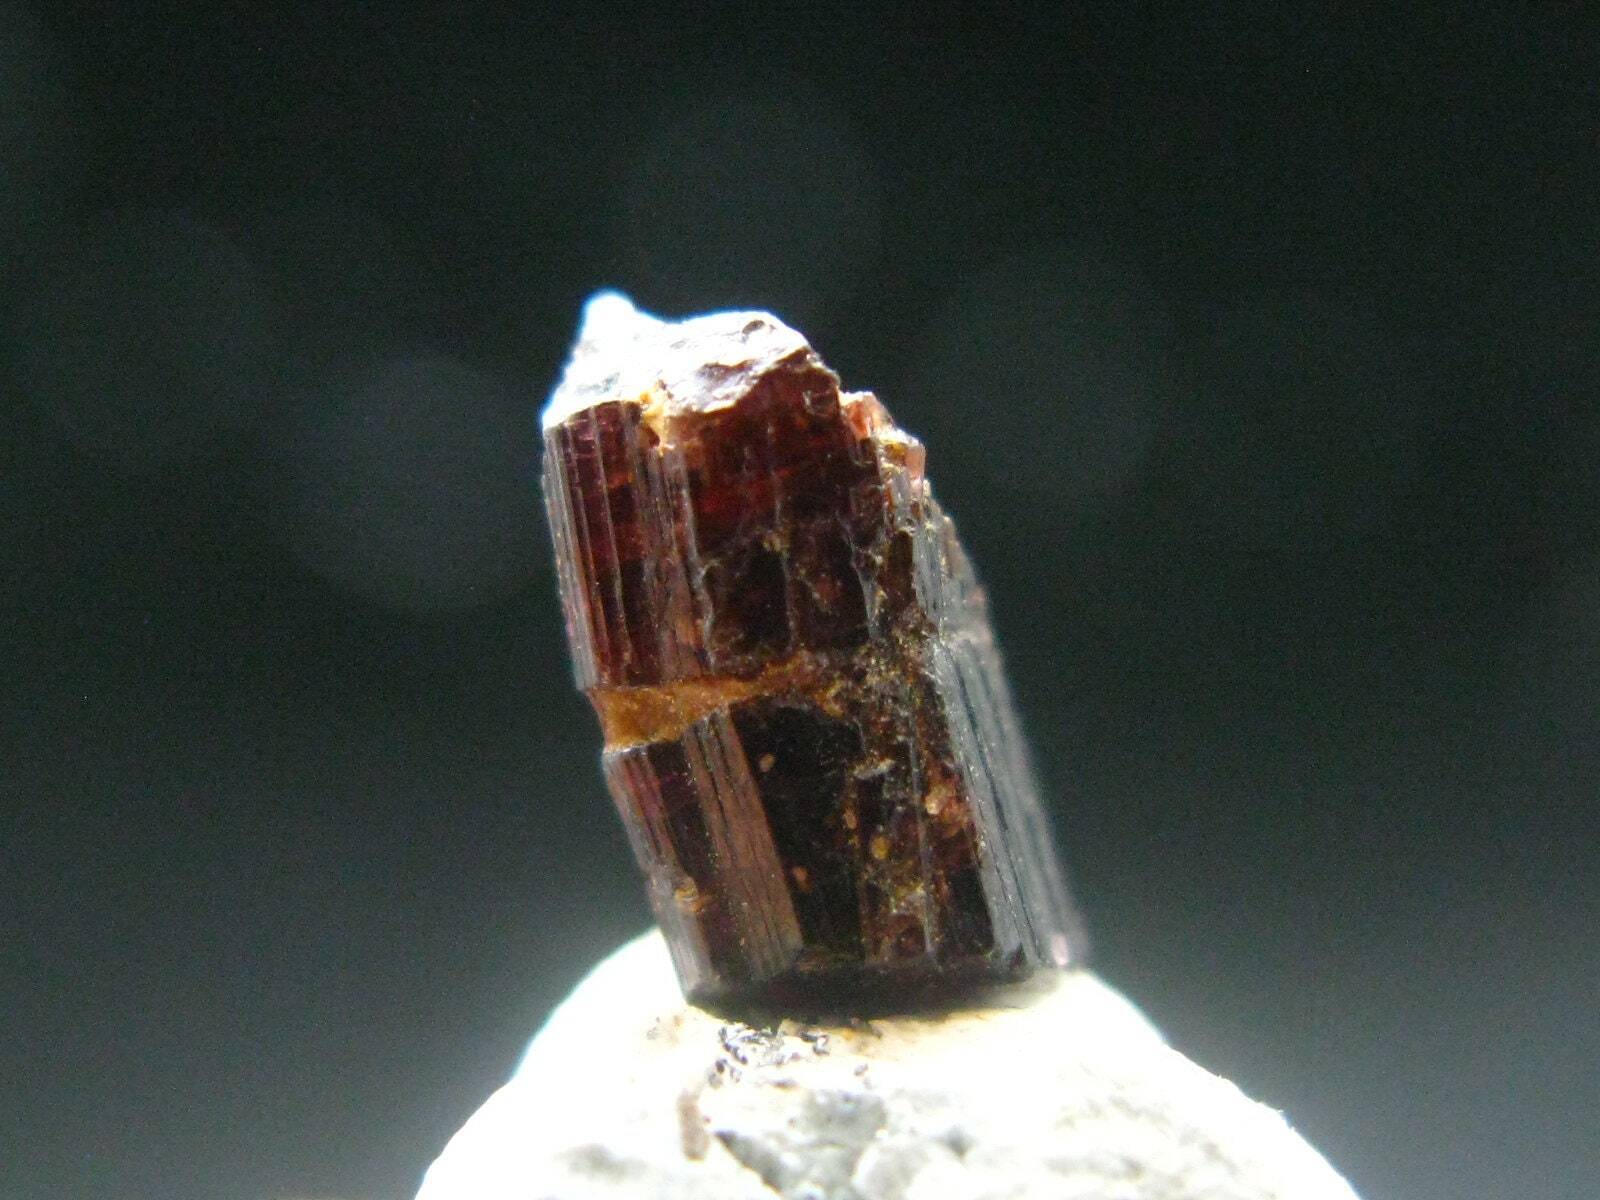 Rare Painite Crystal From Myanmar - 2.06 Carats